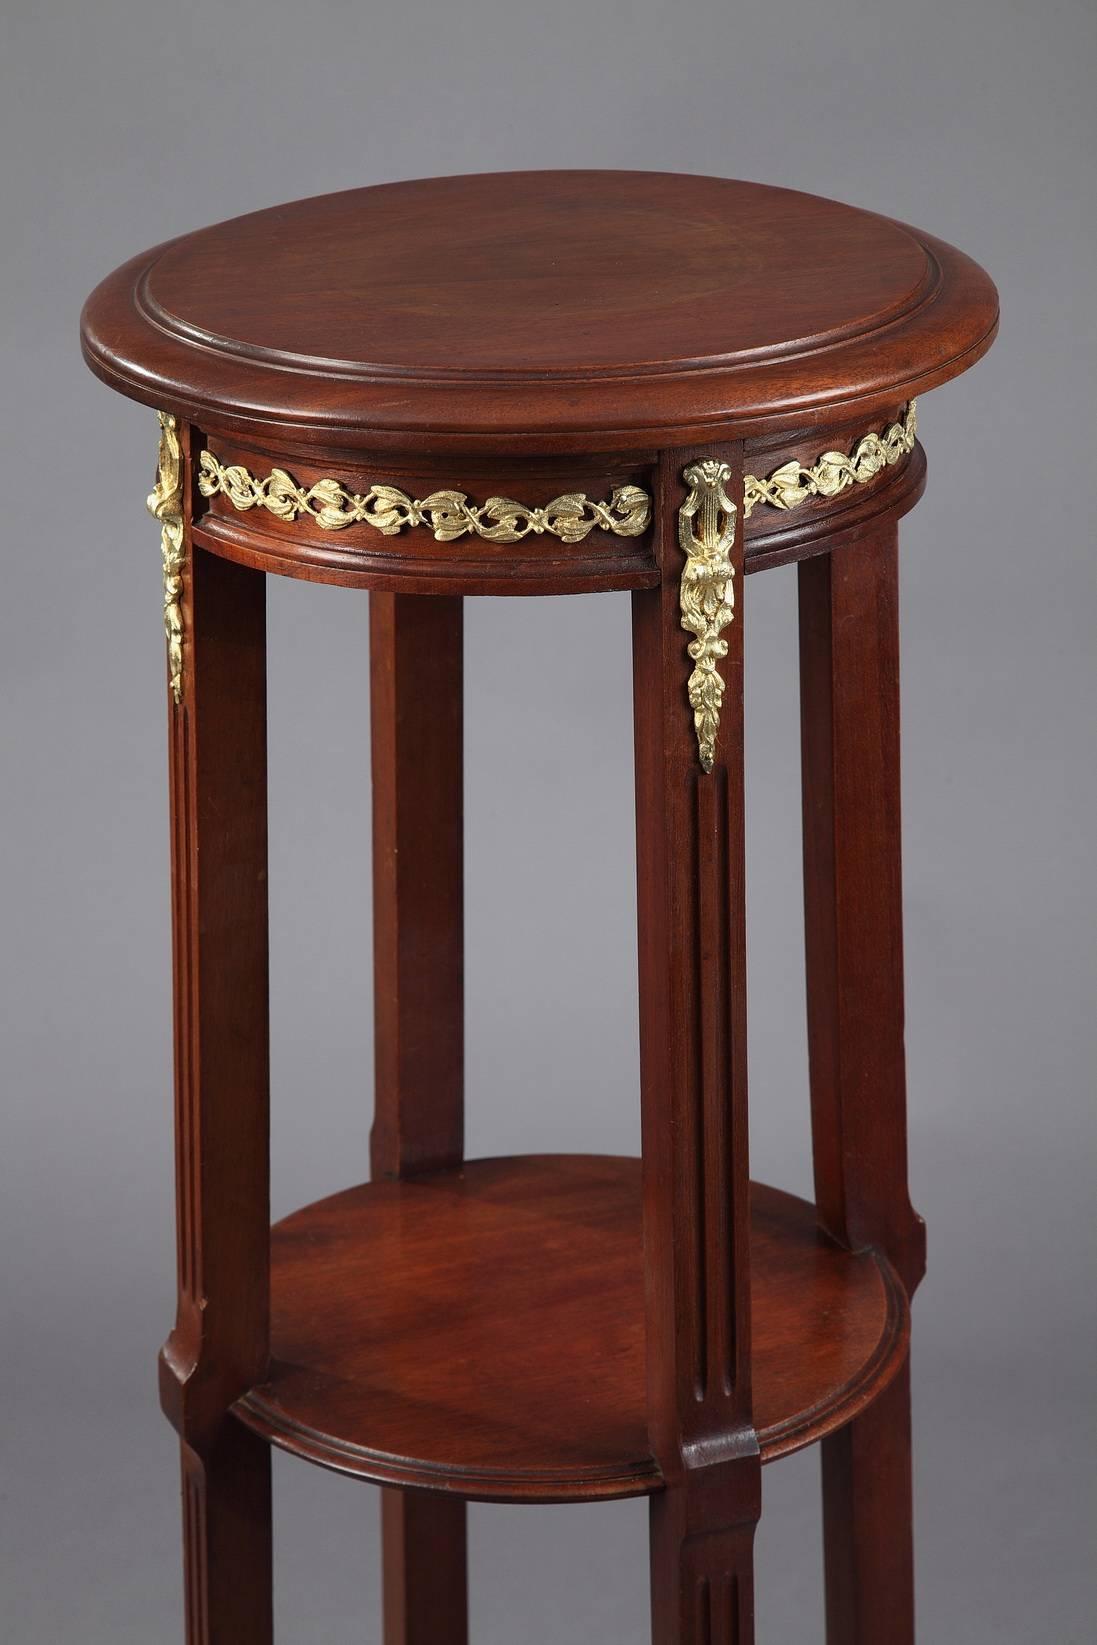 Display column in mahogany, composed of three display plates with round sections. The set rests on four curved feet decorated with gilt bronze foliage. The upper plate is embellished with foliate interlace. Late 19th century period.

circa